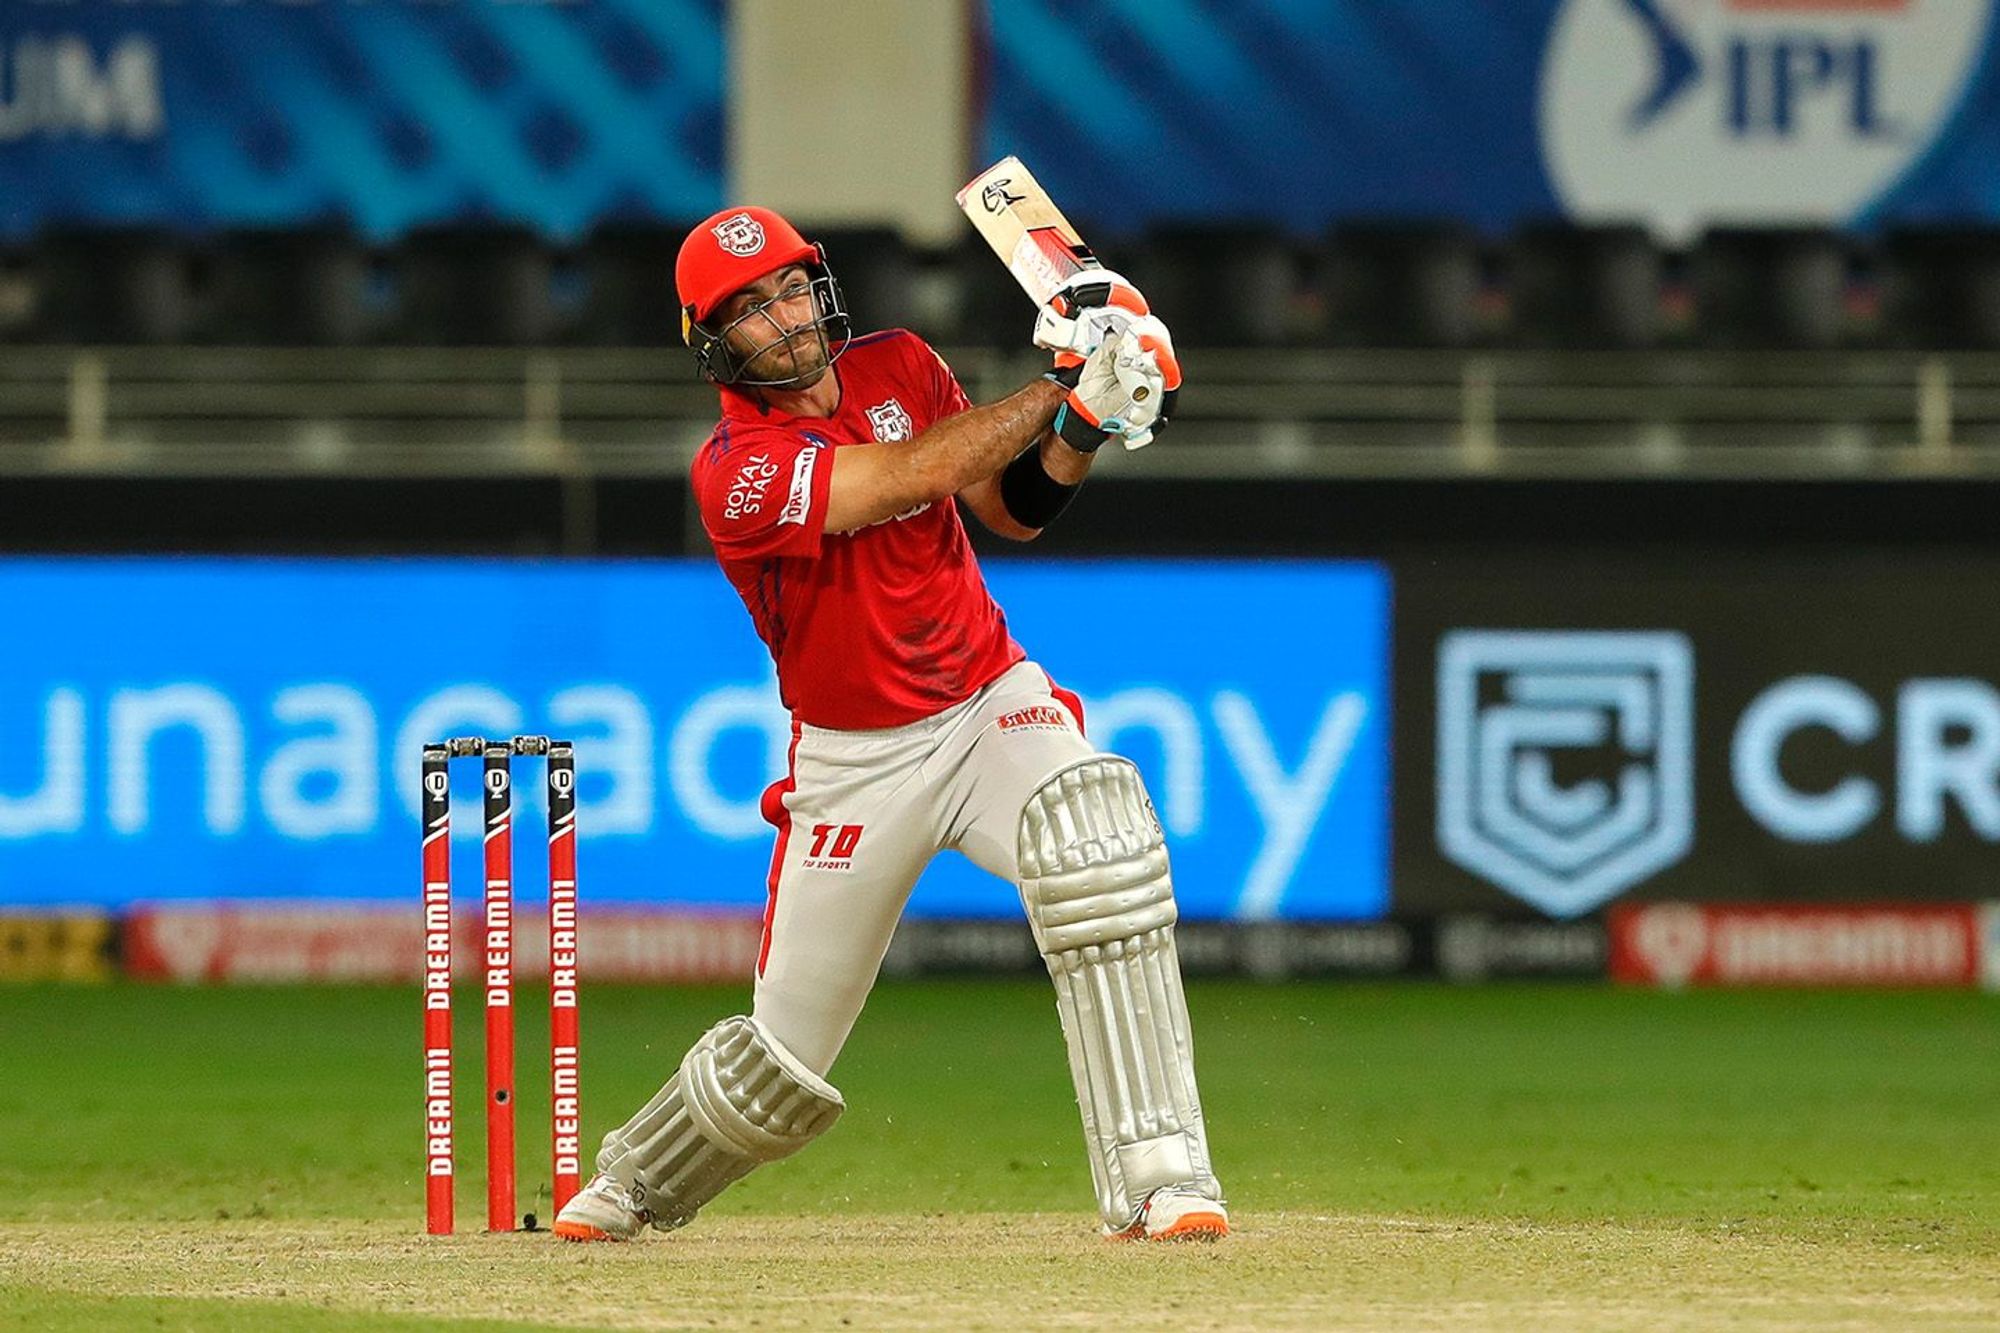 Glenn Maxwell disappointed the KXIP fans in IPL 2020 | BCCI/IPL